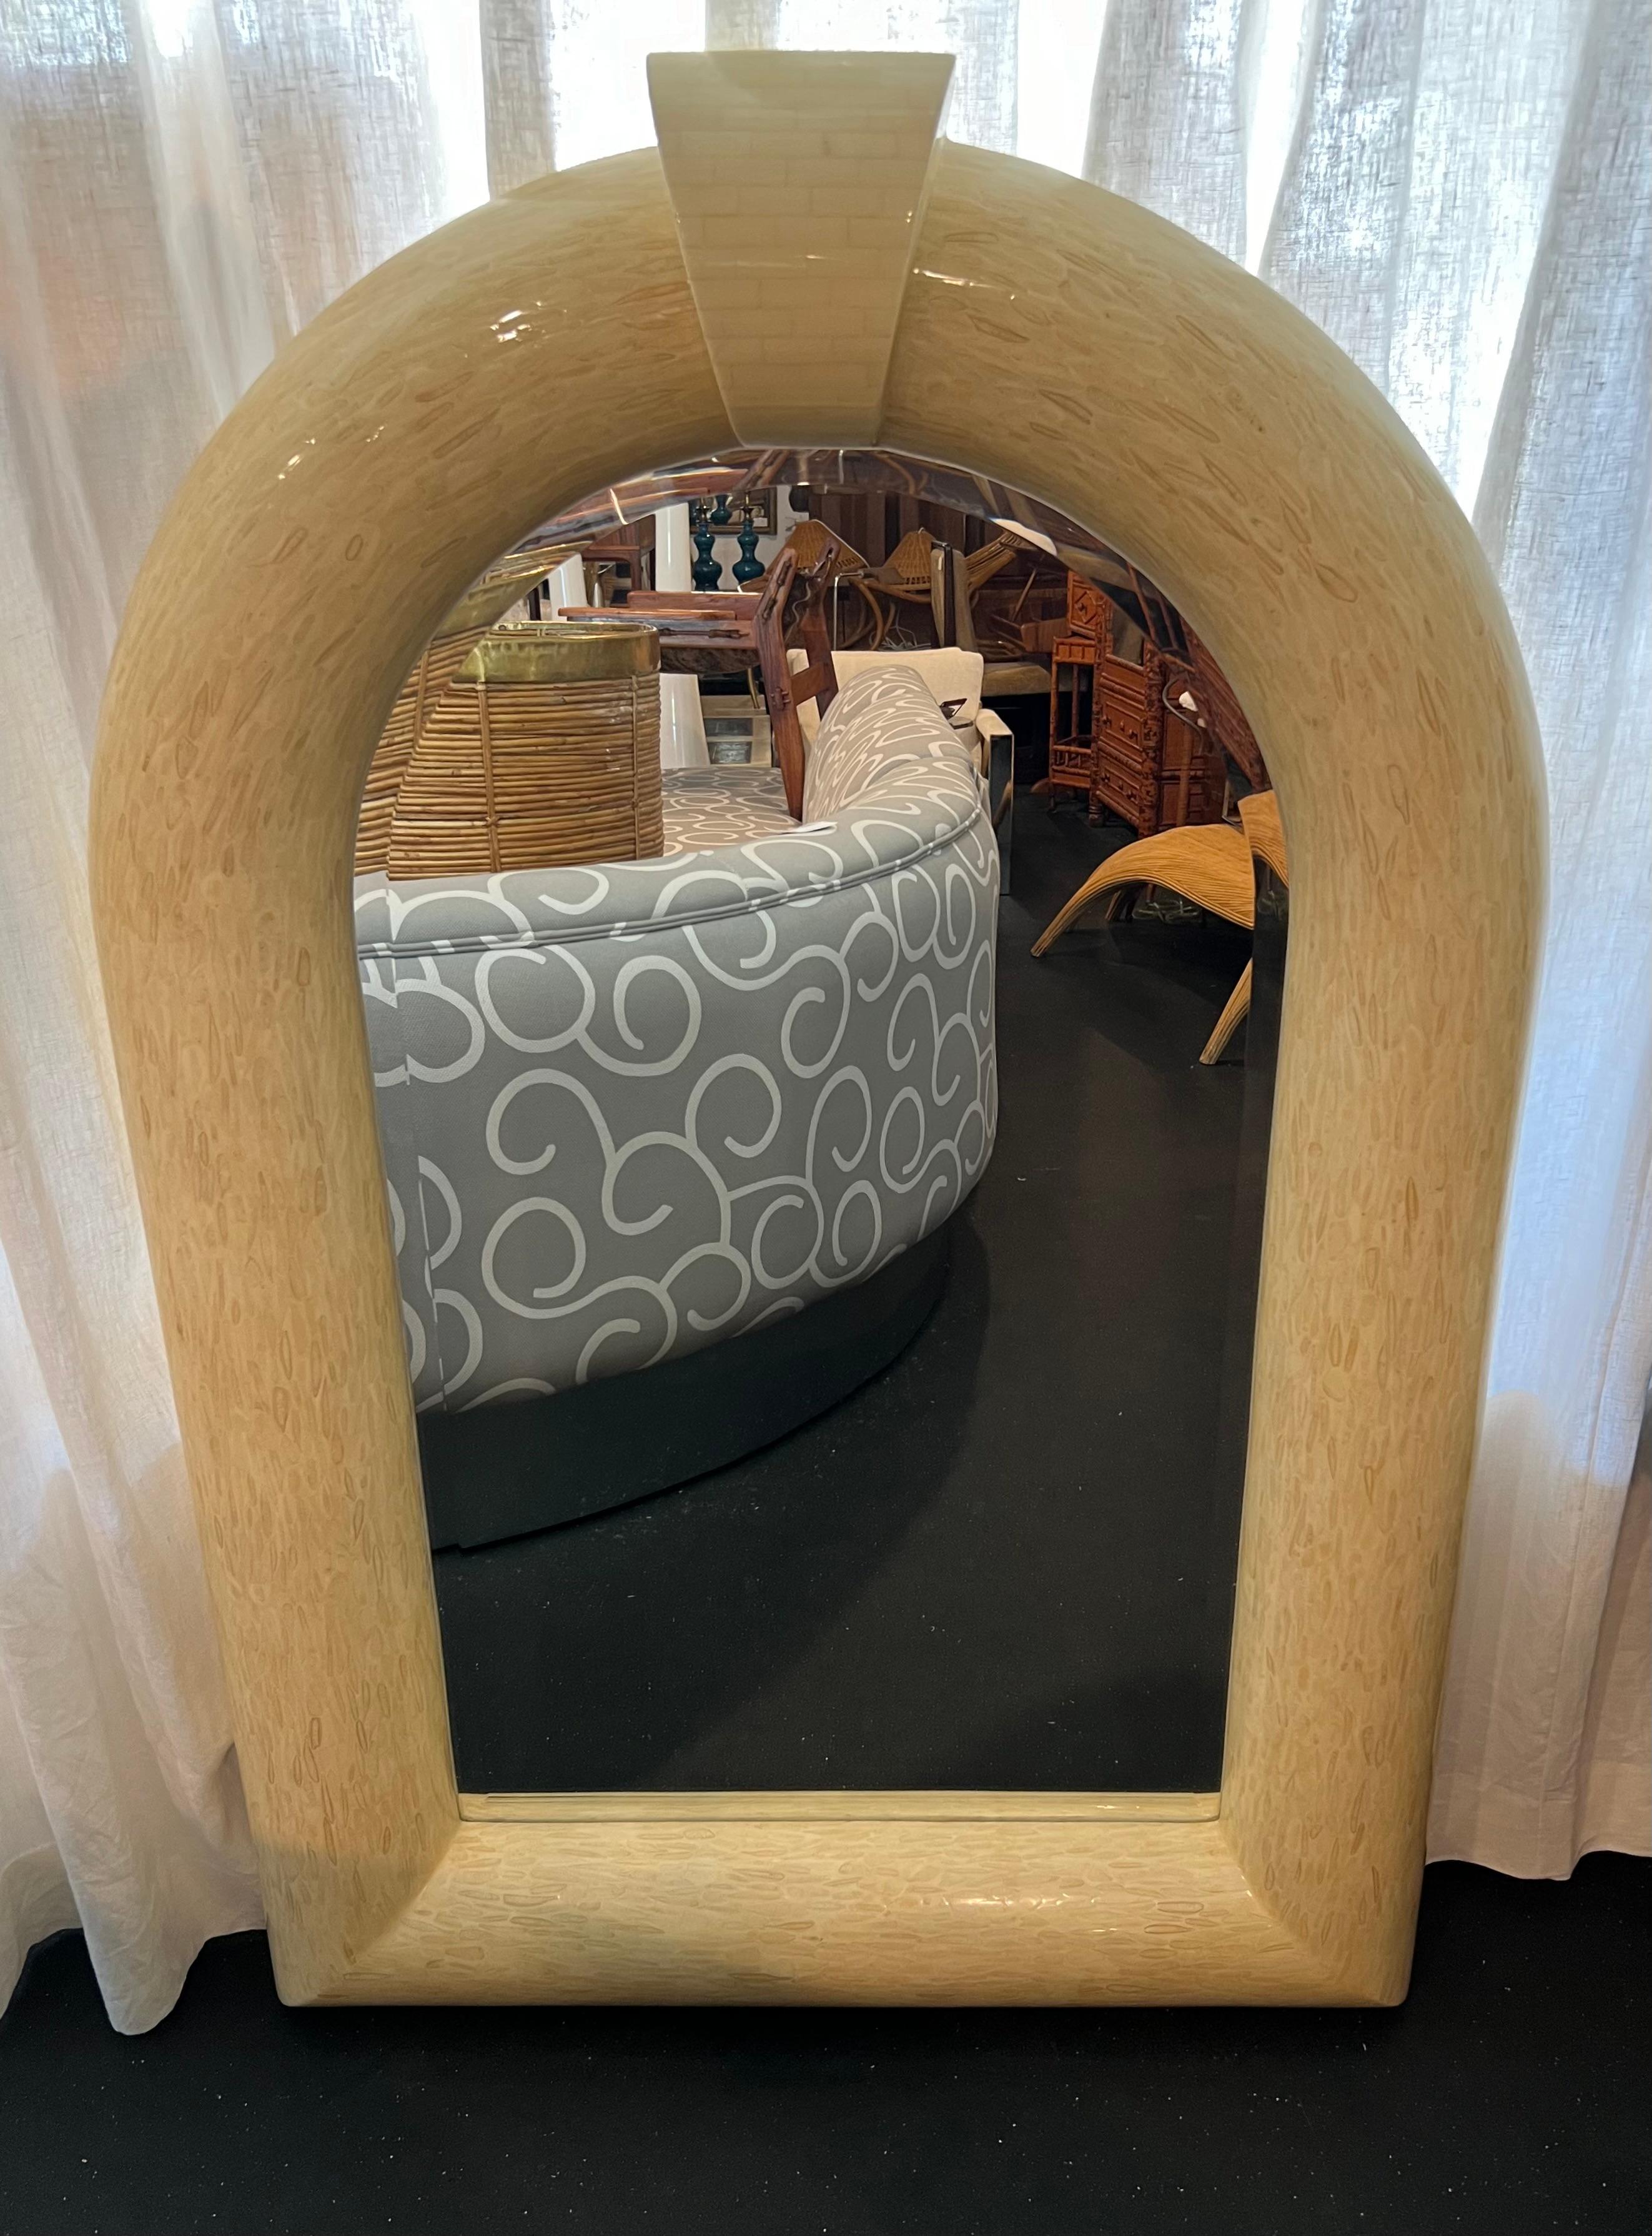 Karl Springer style tessellated antler and bone art deco wall mirror. Rare form. Additional photos available upon request.

Would work well in a variety of interiors such as modern, mid century modern, Hollywood regency, etc. Piece blends seamlessly